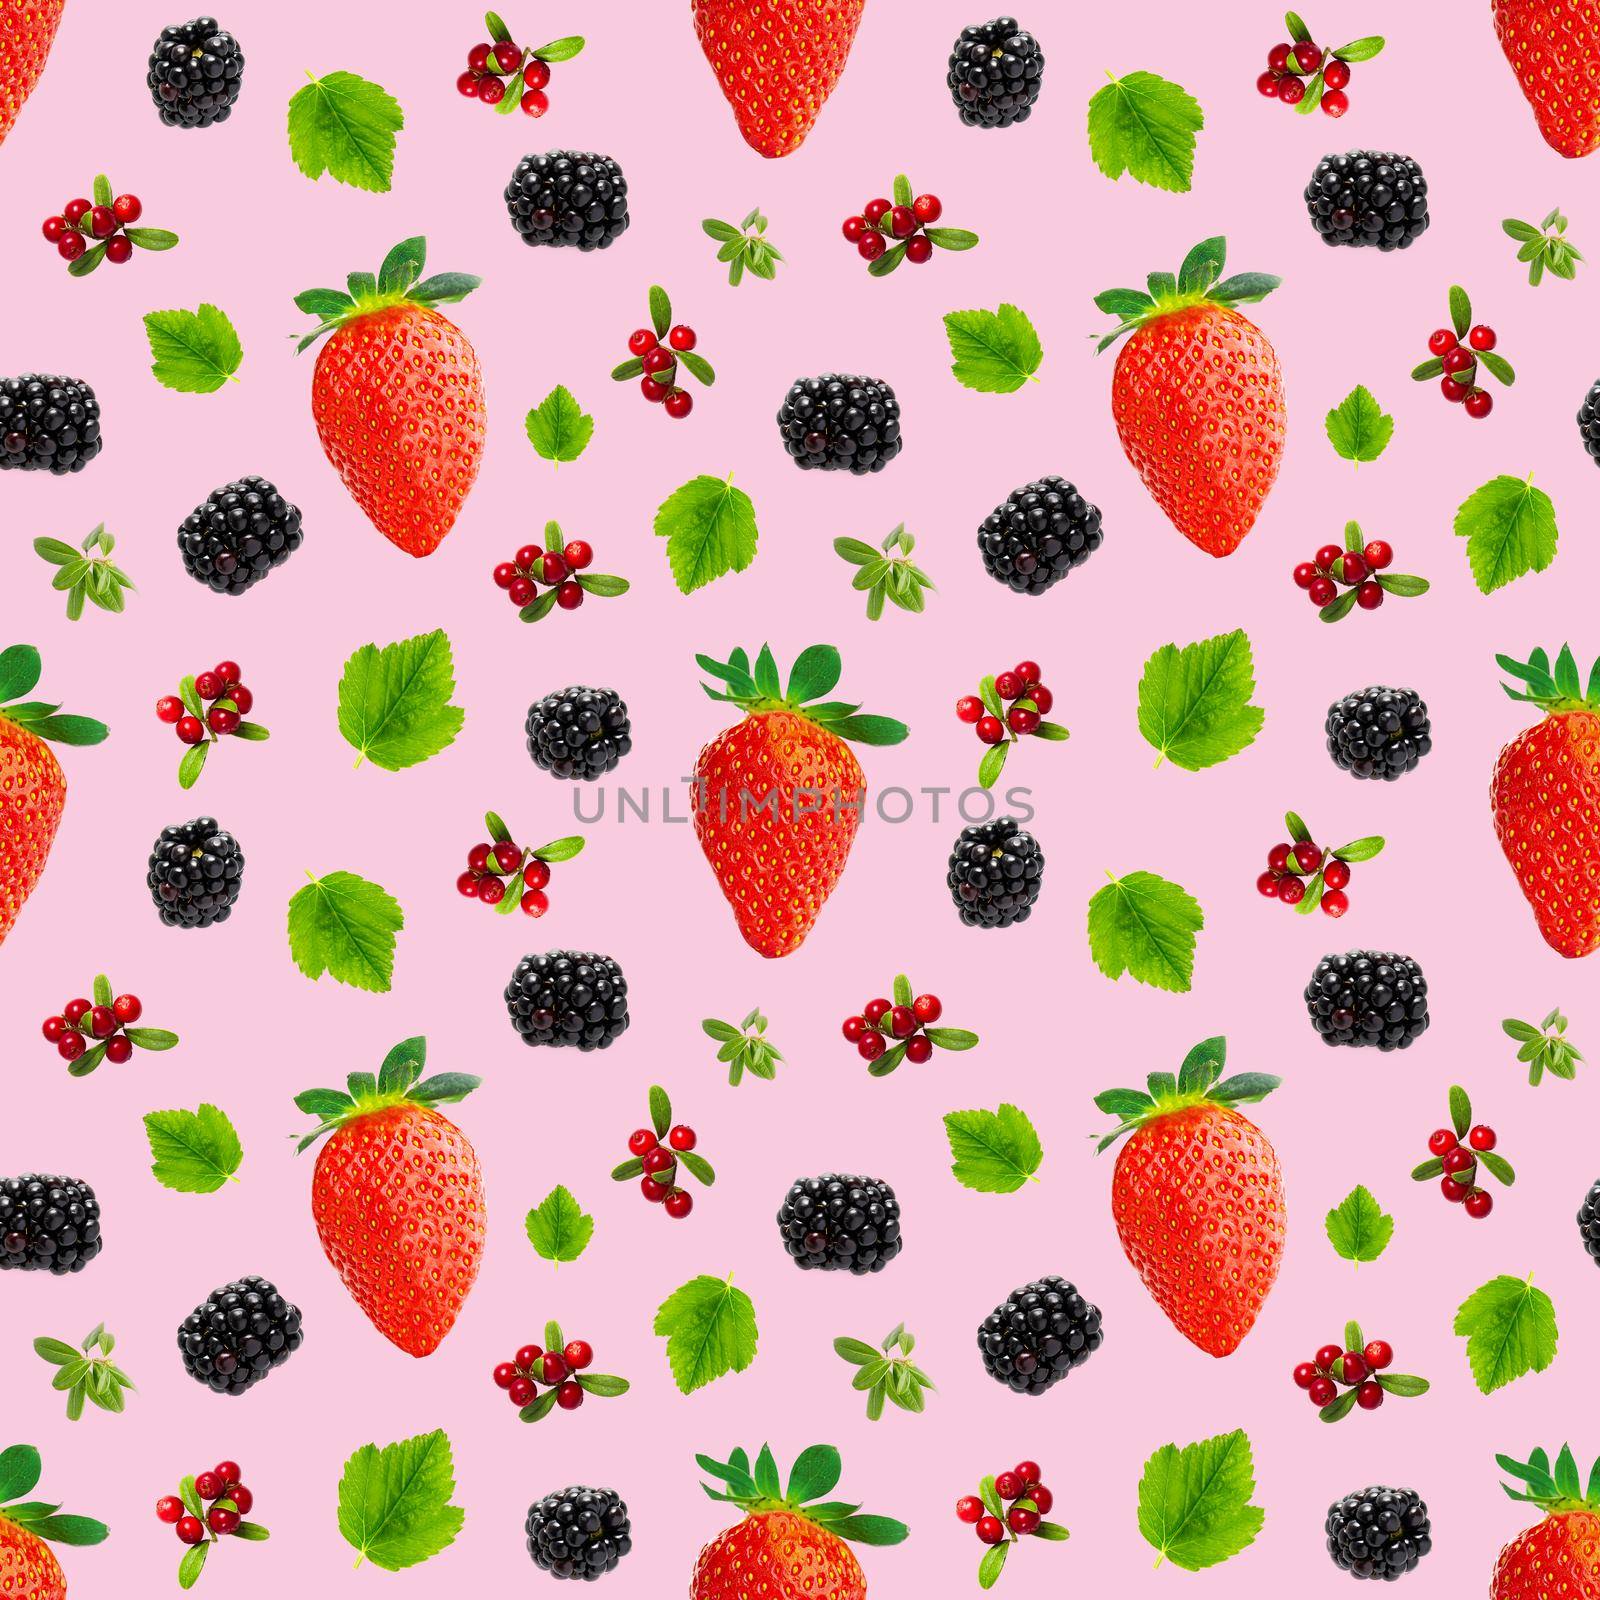 Falling berries seamless pattern isolated on pink background, different flying forest berries. Strawberry, cranberry, bramble